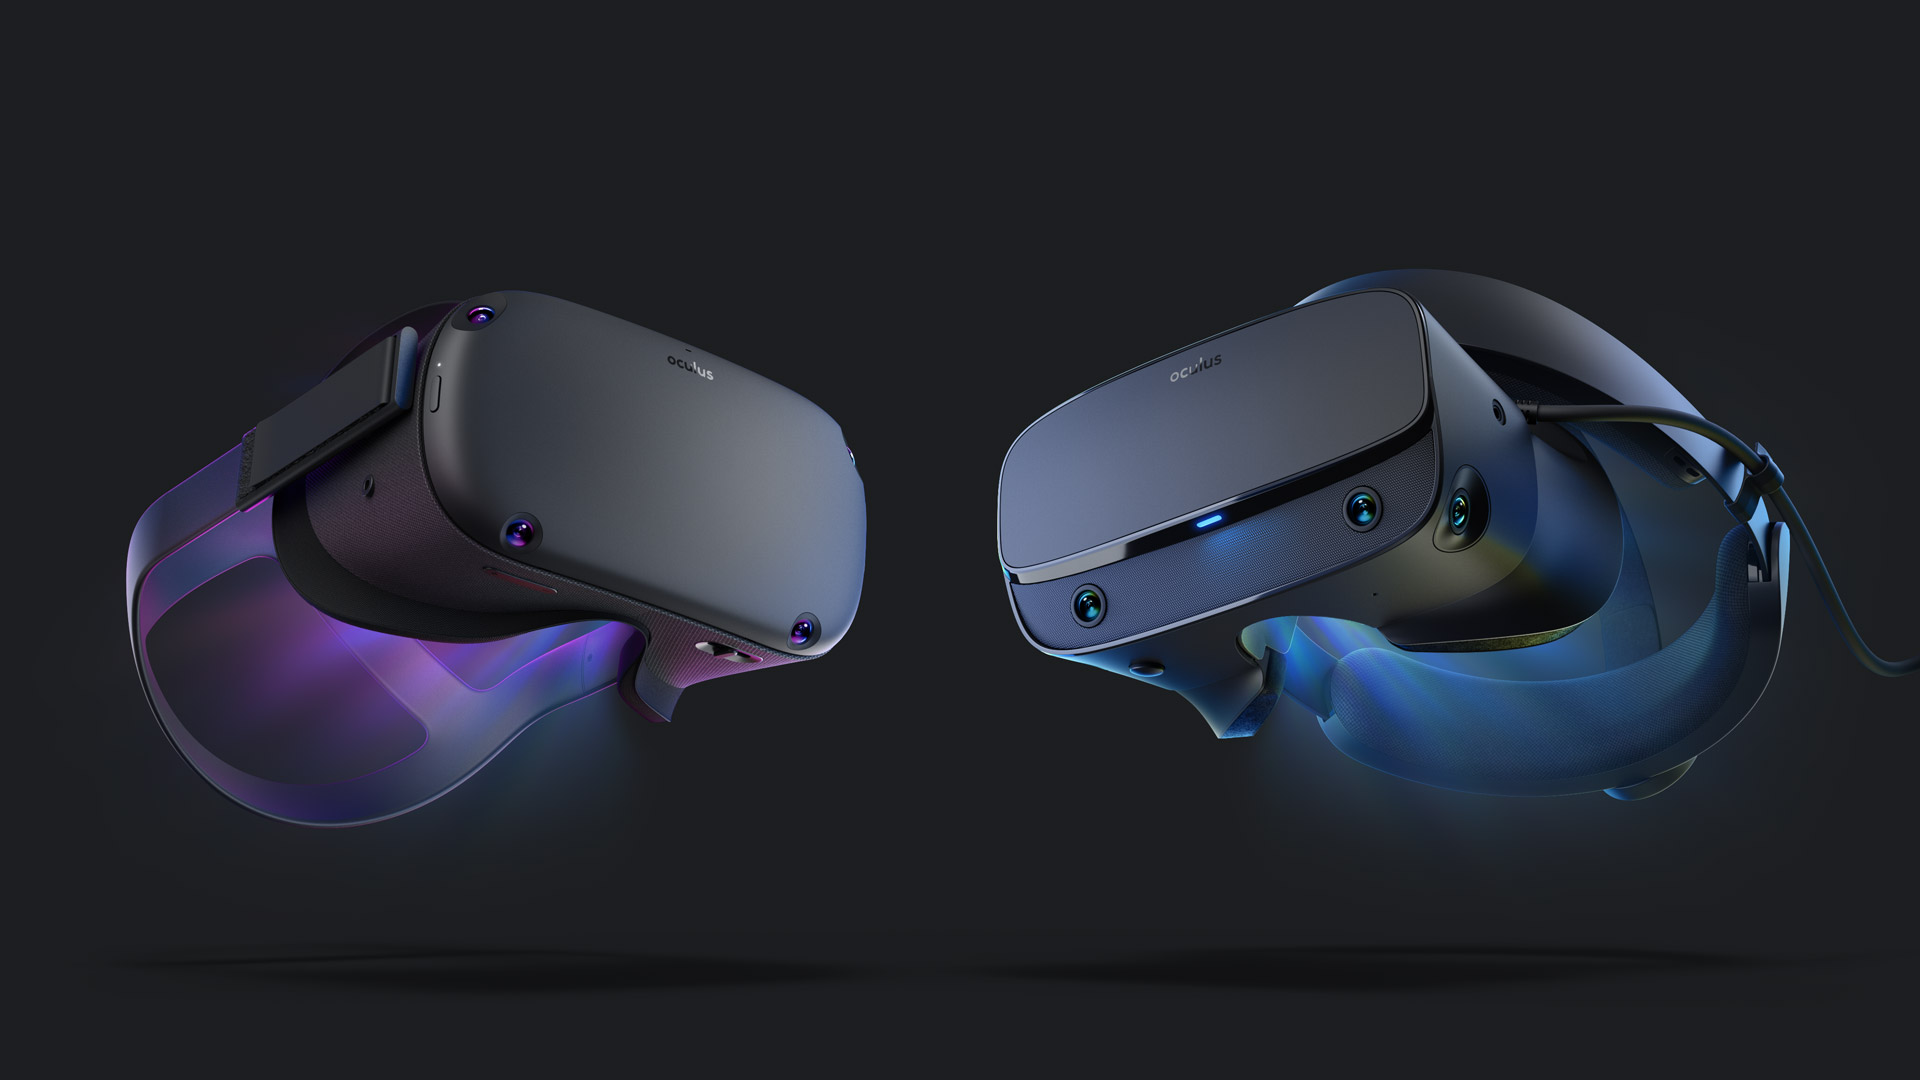 Oculus Rift vs. Oculus Quest – the Difference?